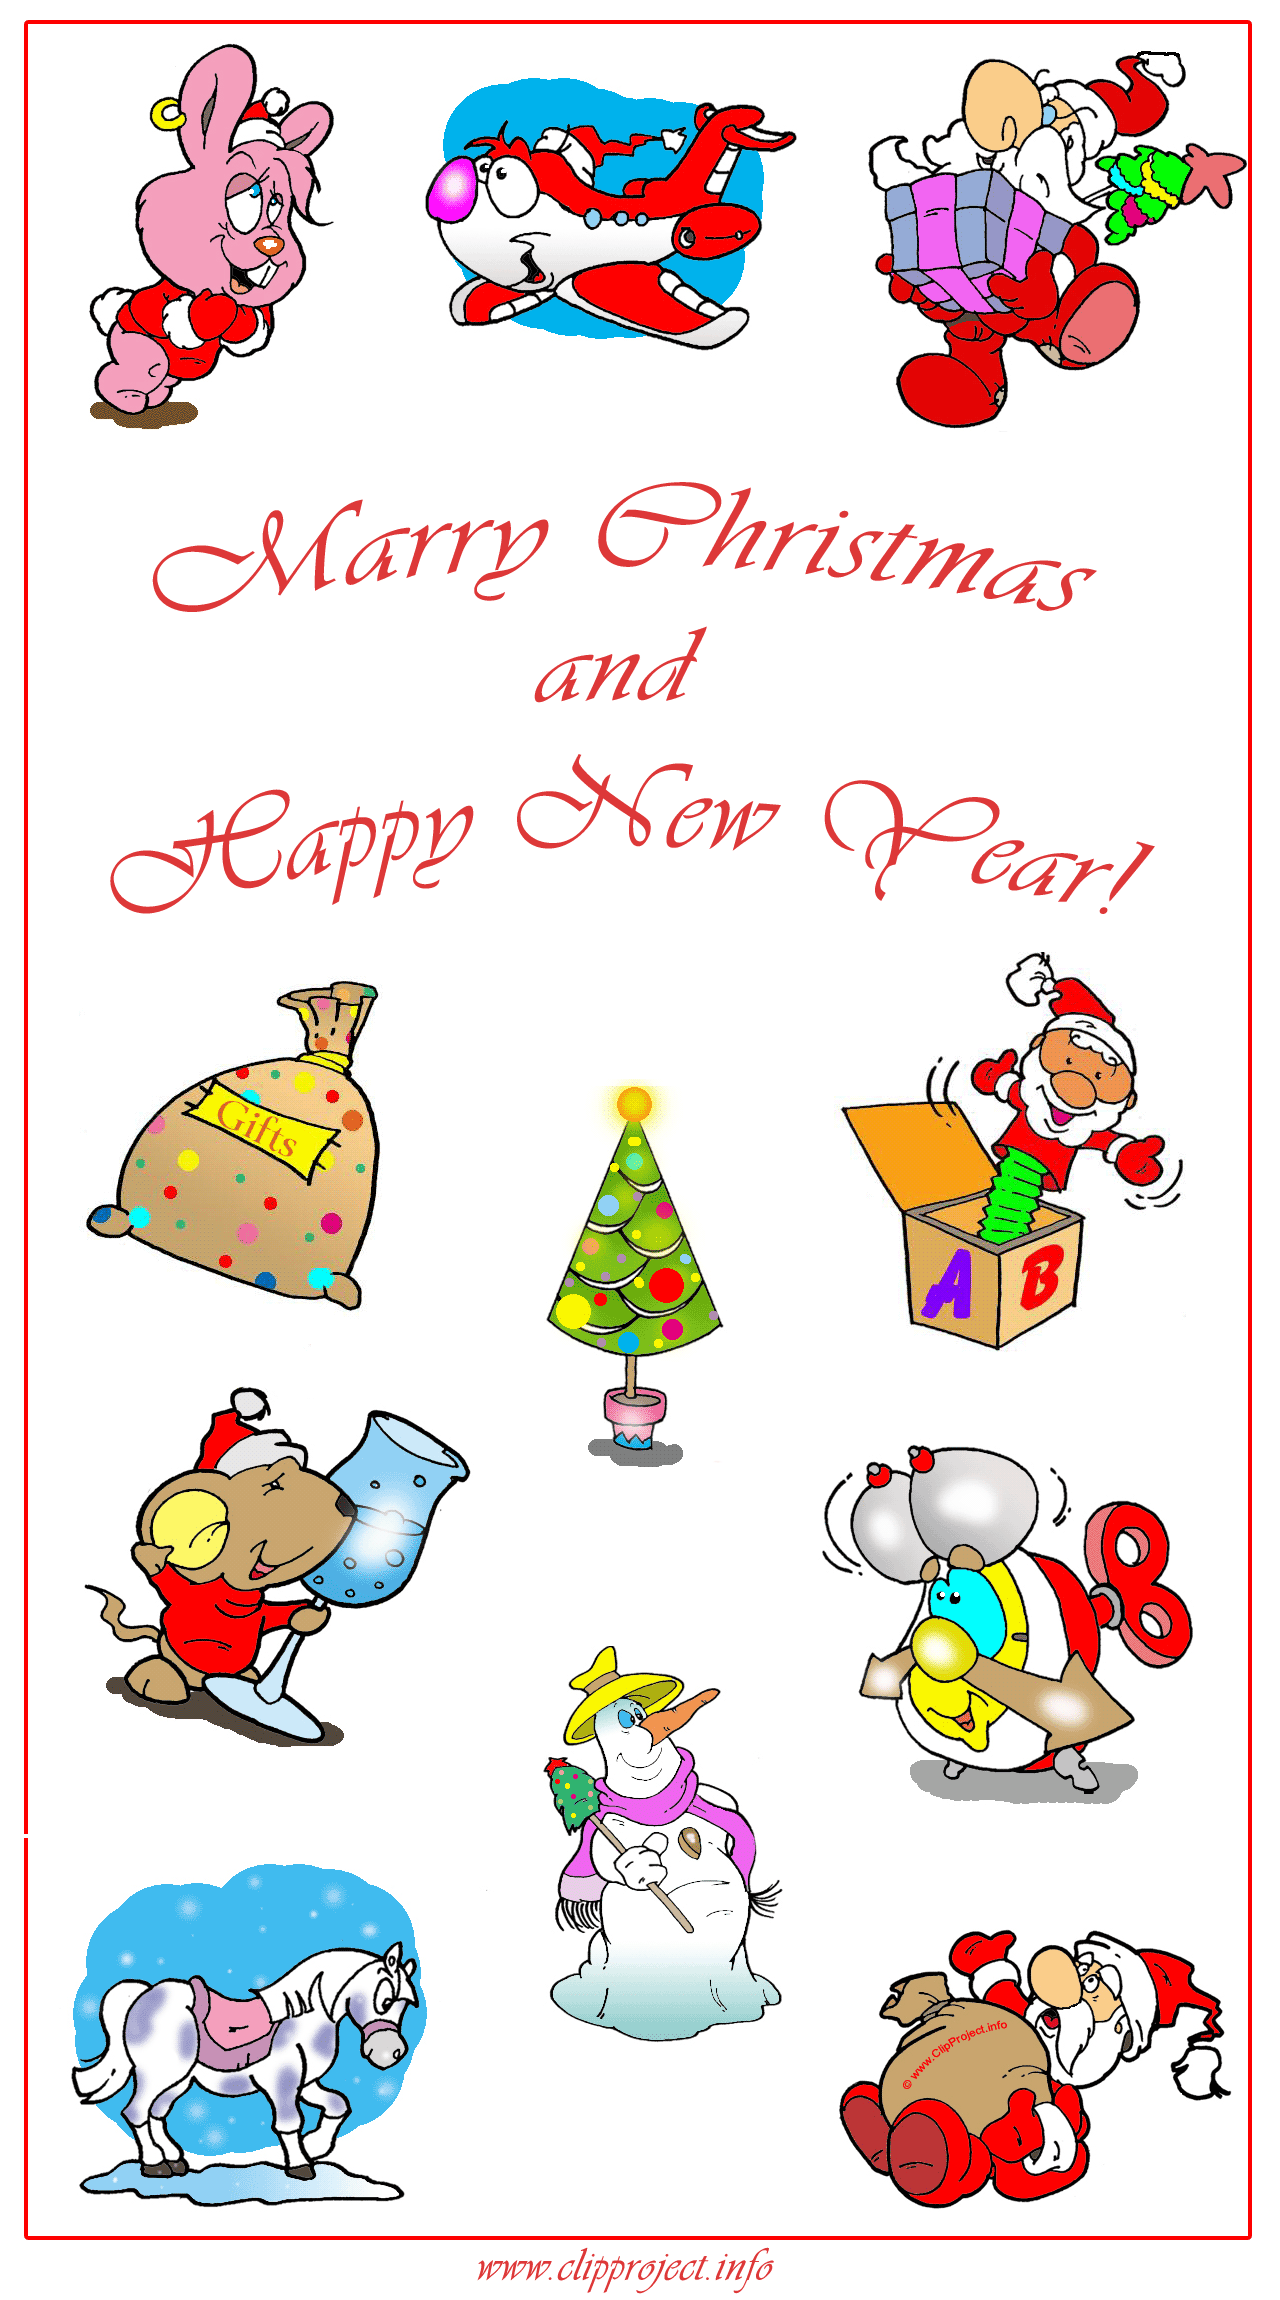 Christmas and New Year Free Cartoon Clipart, Cliparts, Clip Art, Images, Image, Download Online free